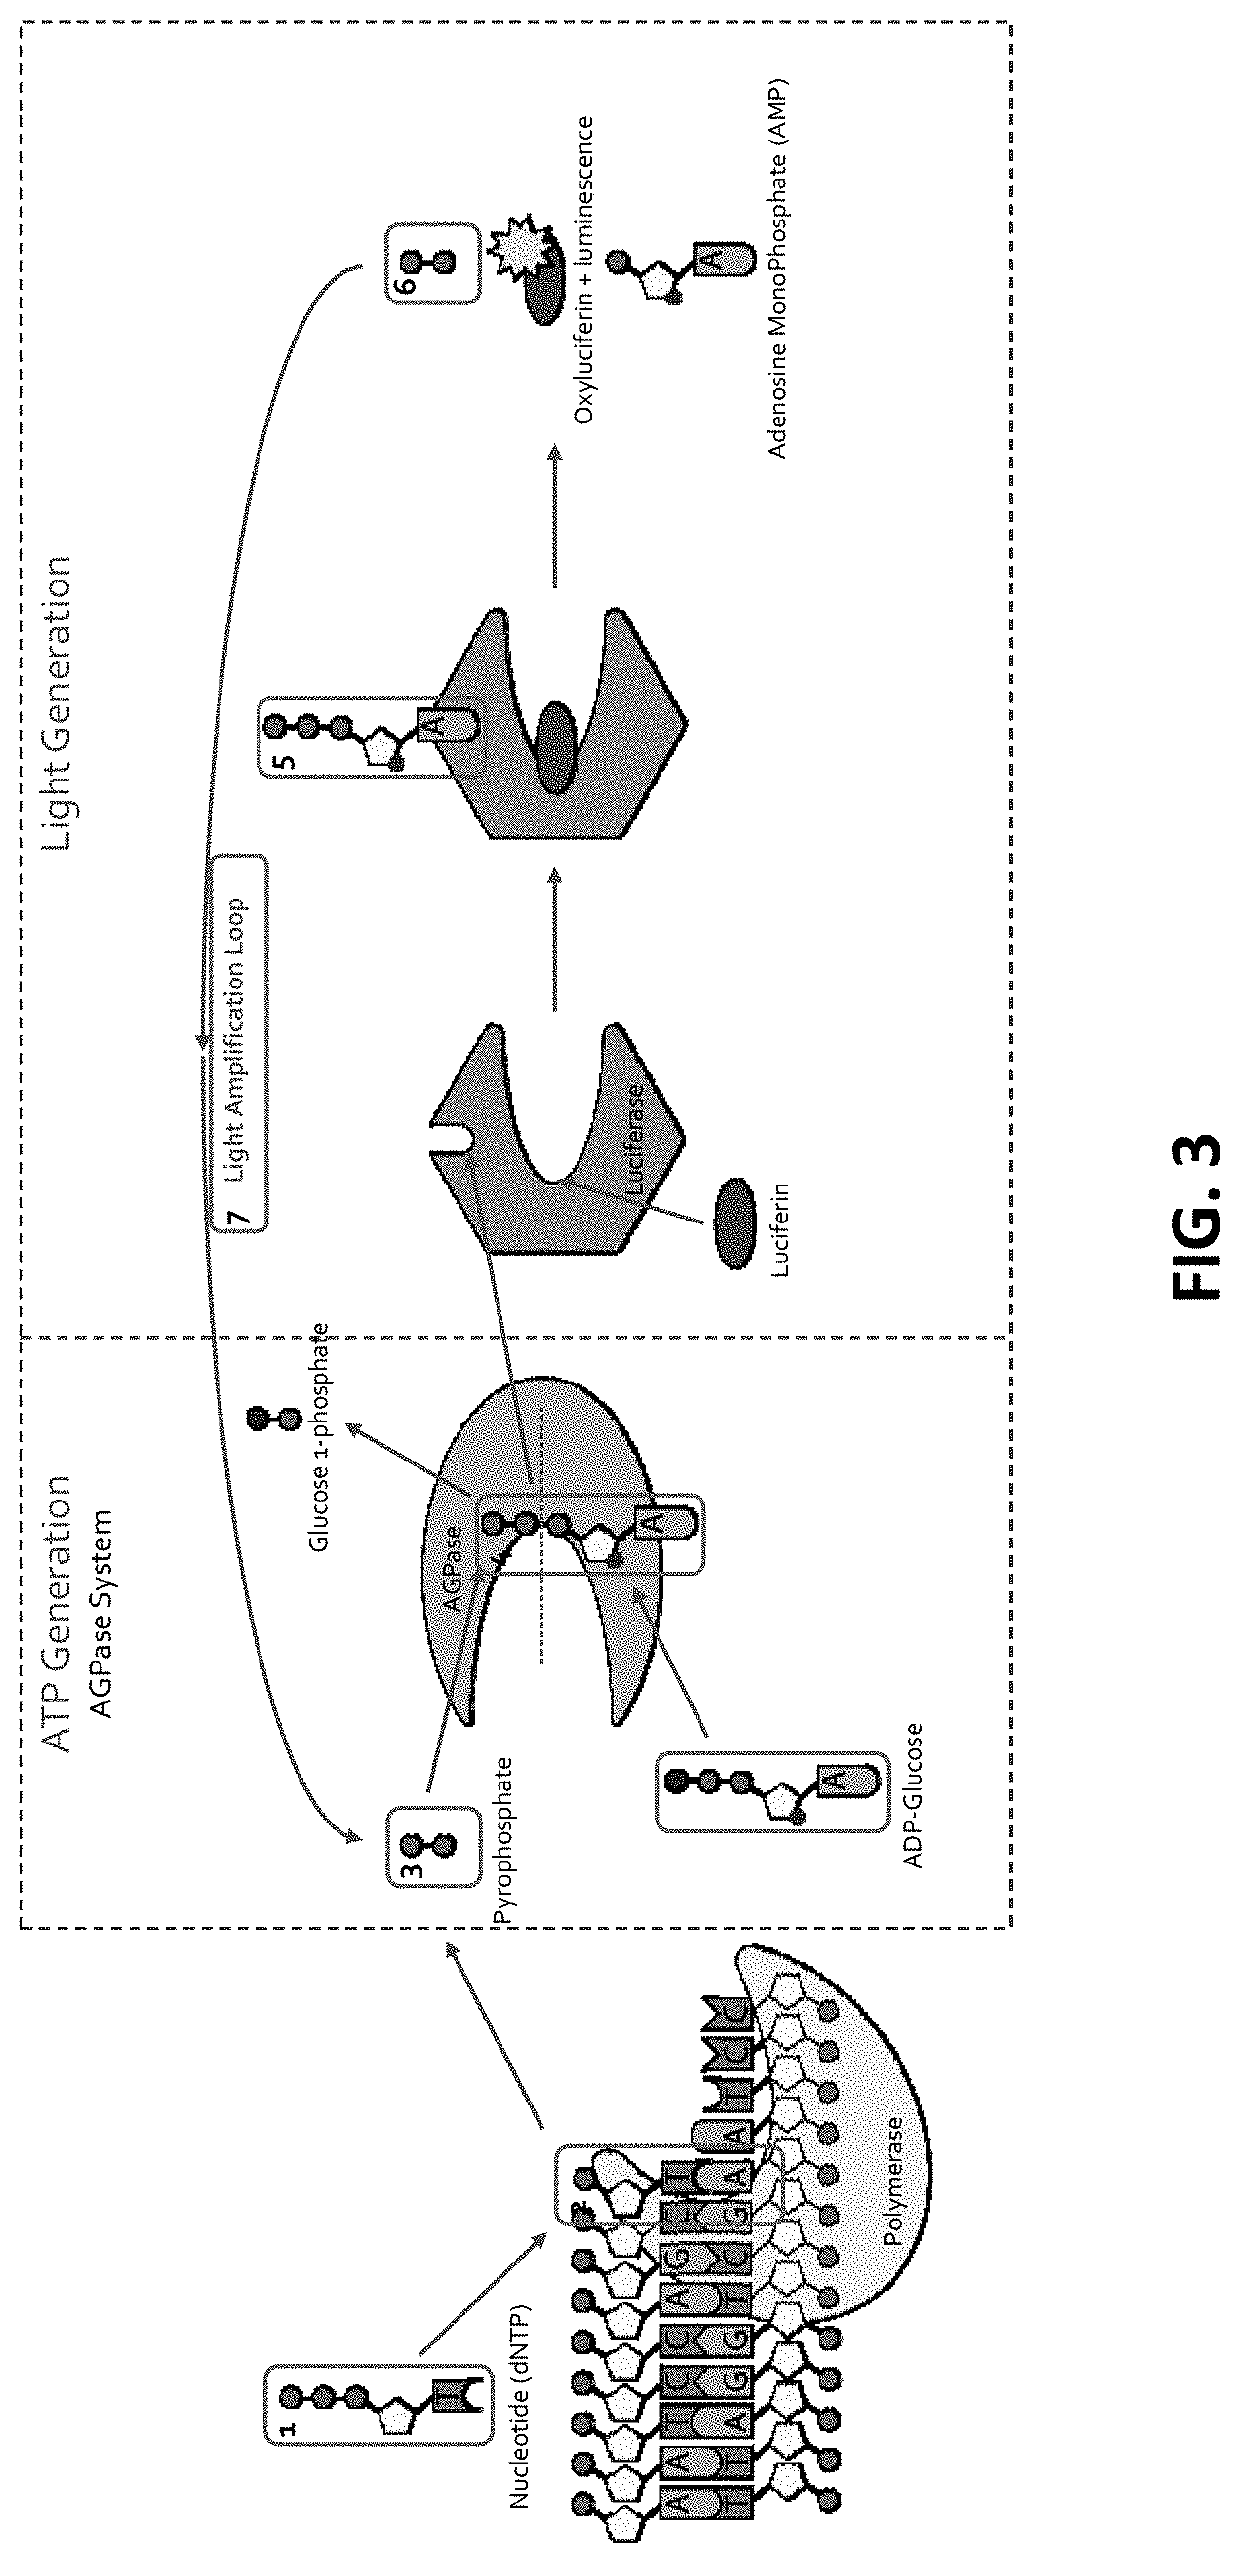 Methods and devices for detecting sars-cov-2